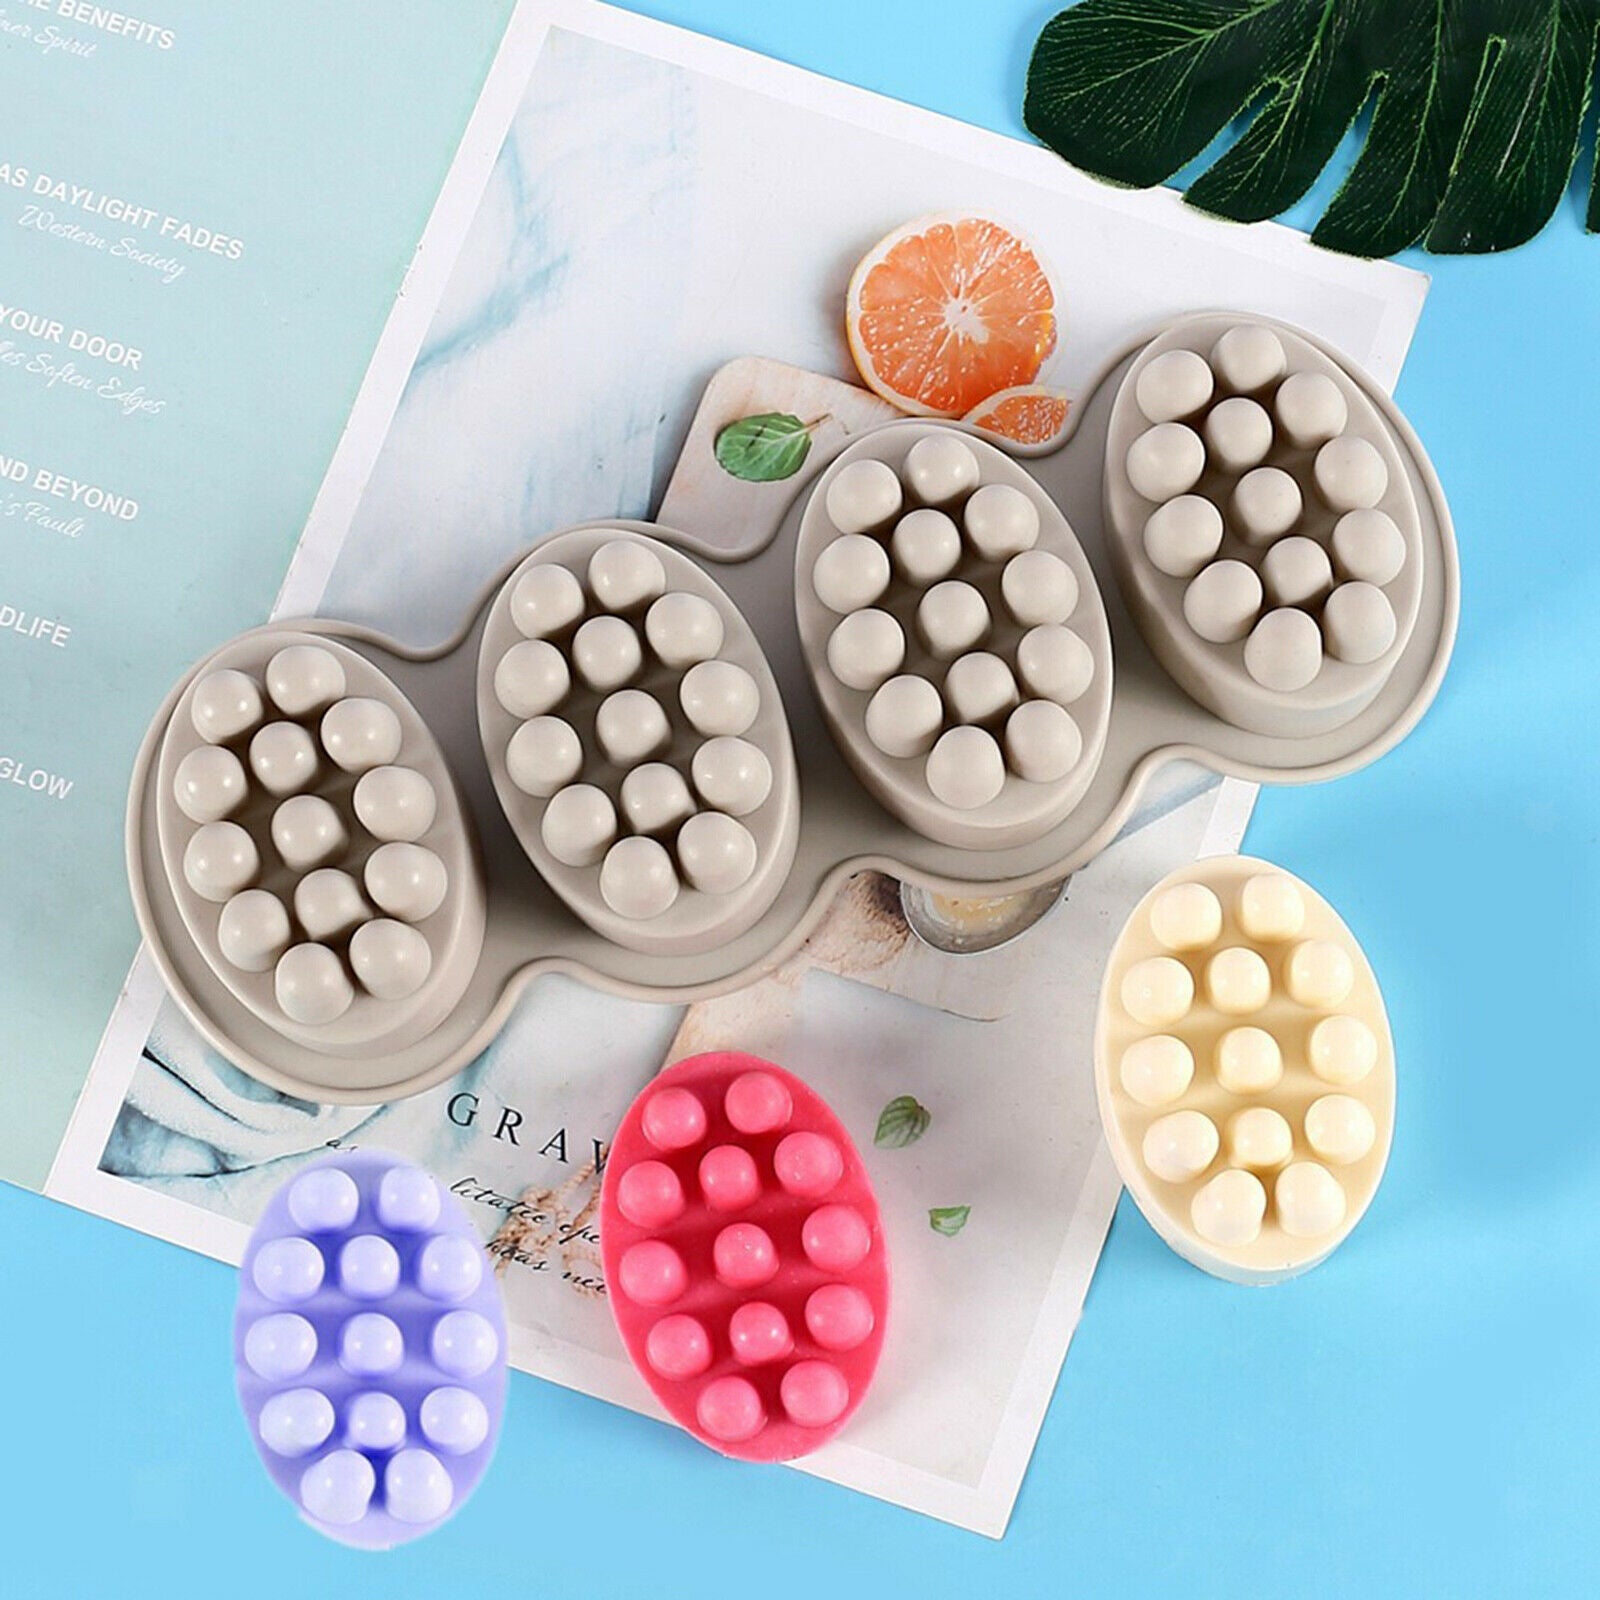 4 Cavity Silicone Soap Mold Handmade Soap Mold Nonstick DIY Craft Mould